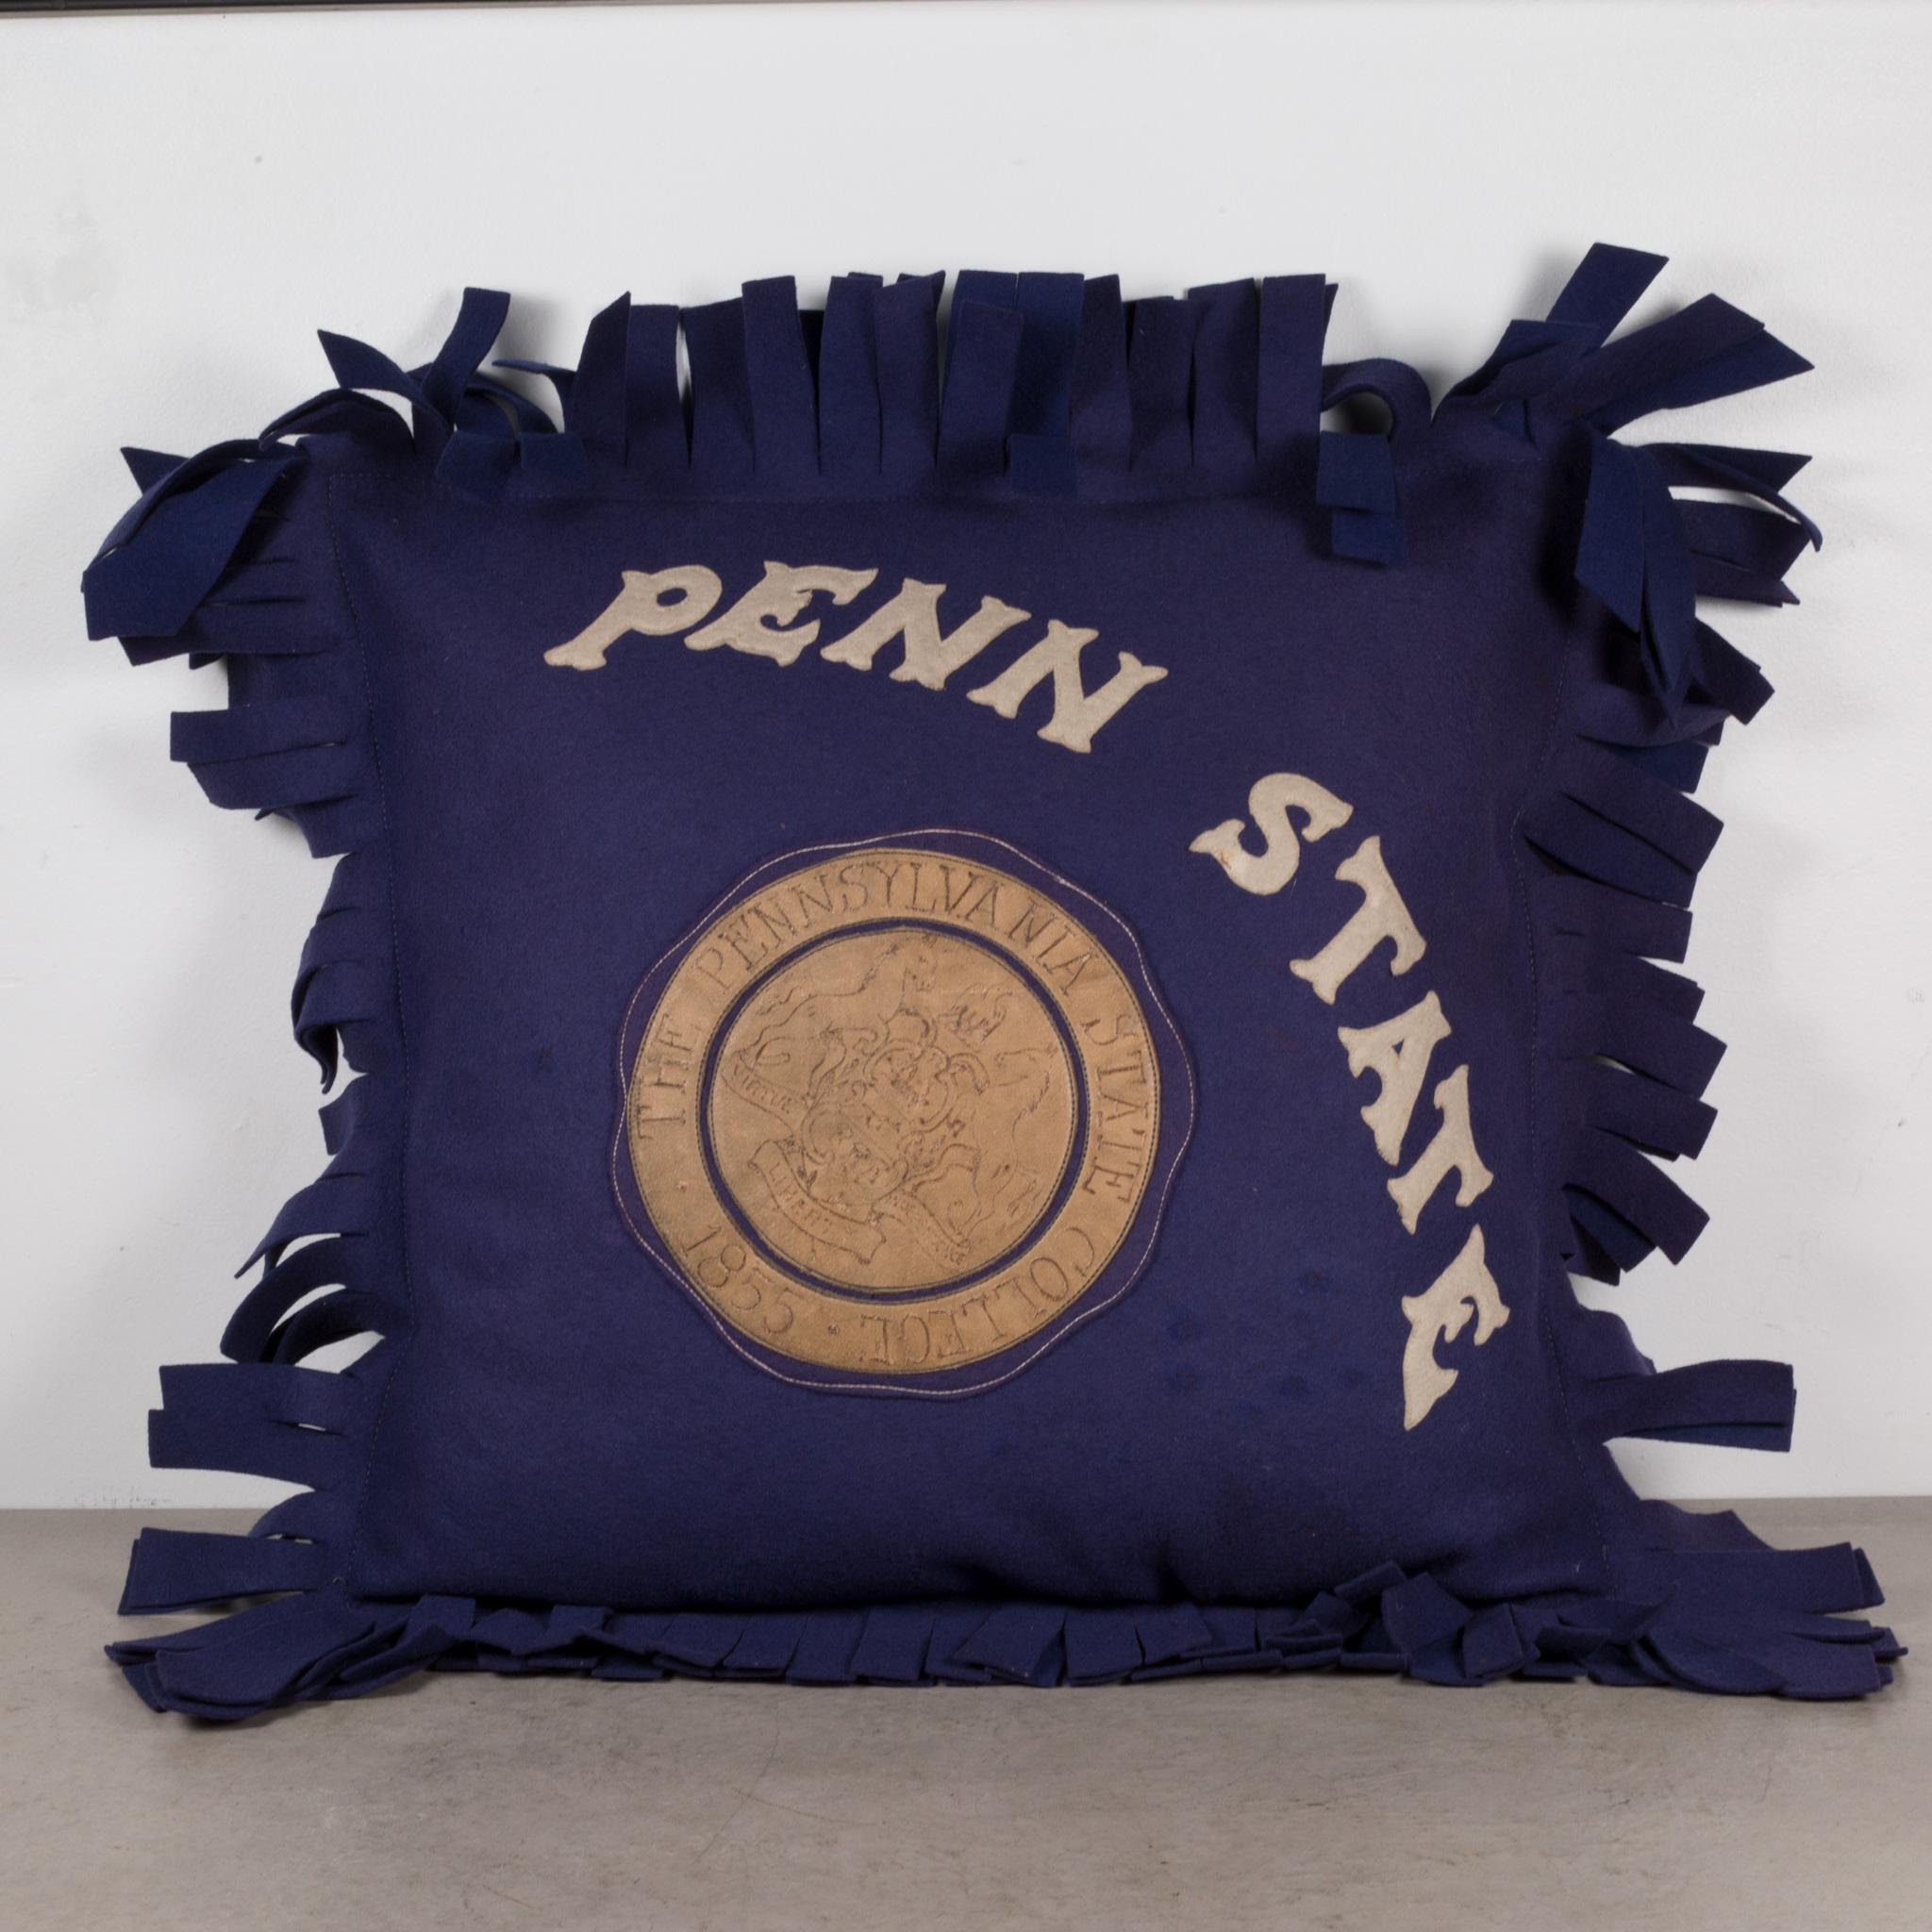 American Classical Vintage Penn State Pillow c.1940 For Sale